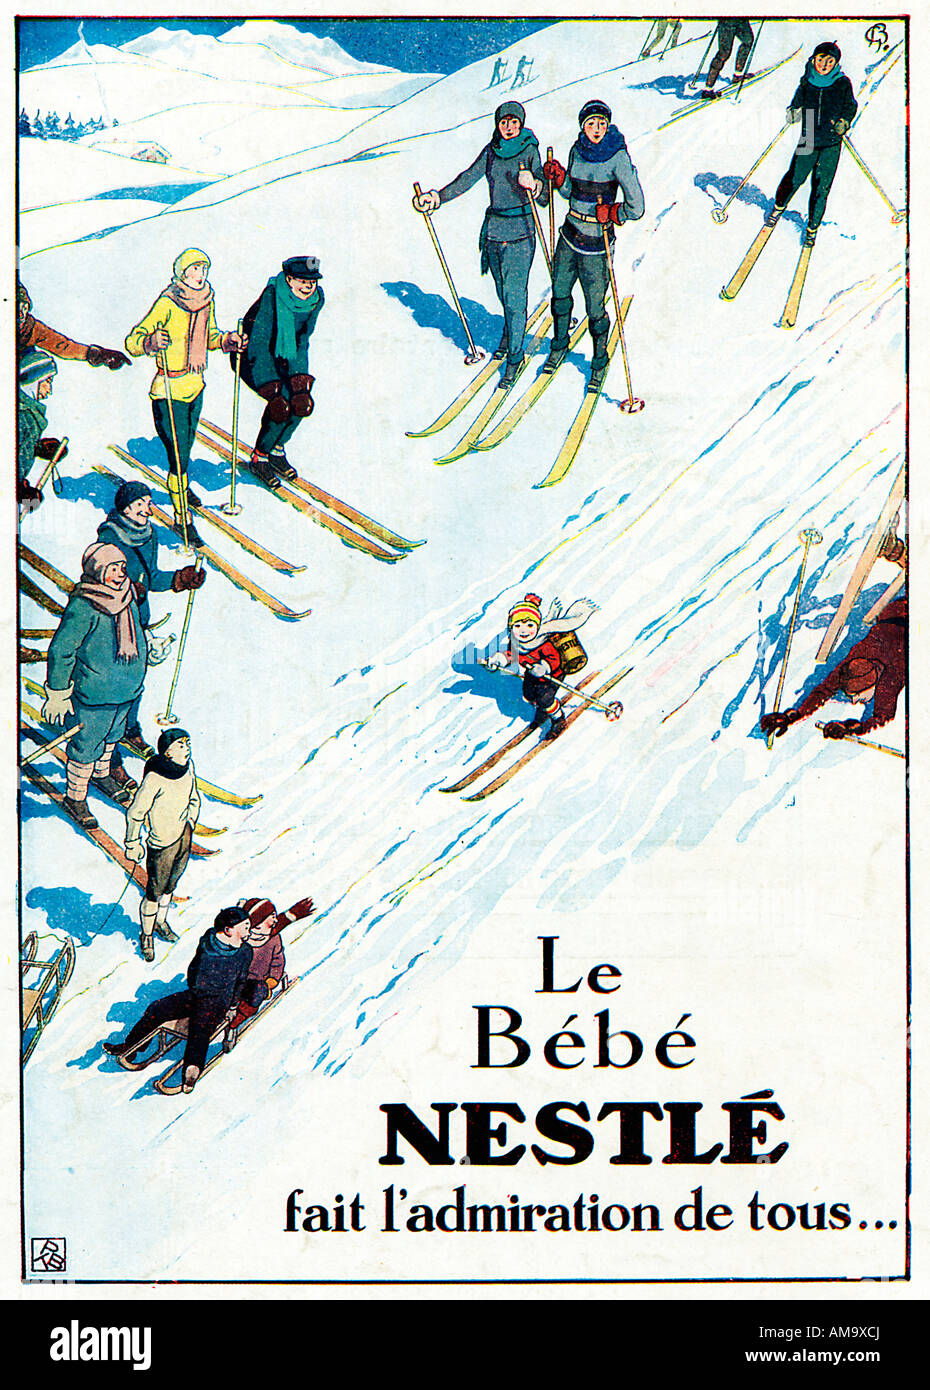 Nestle Baby Skiing 1932 advert for the infant food with a cute child admired by all on the piste Stock Photo